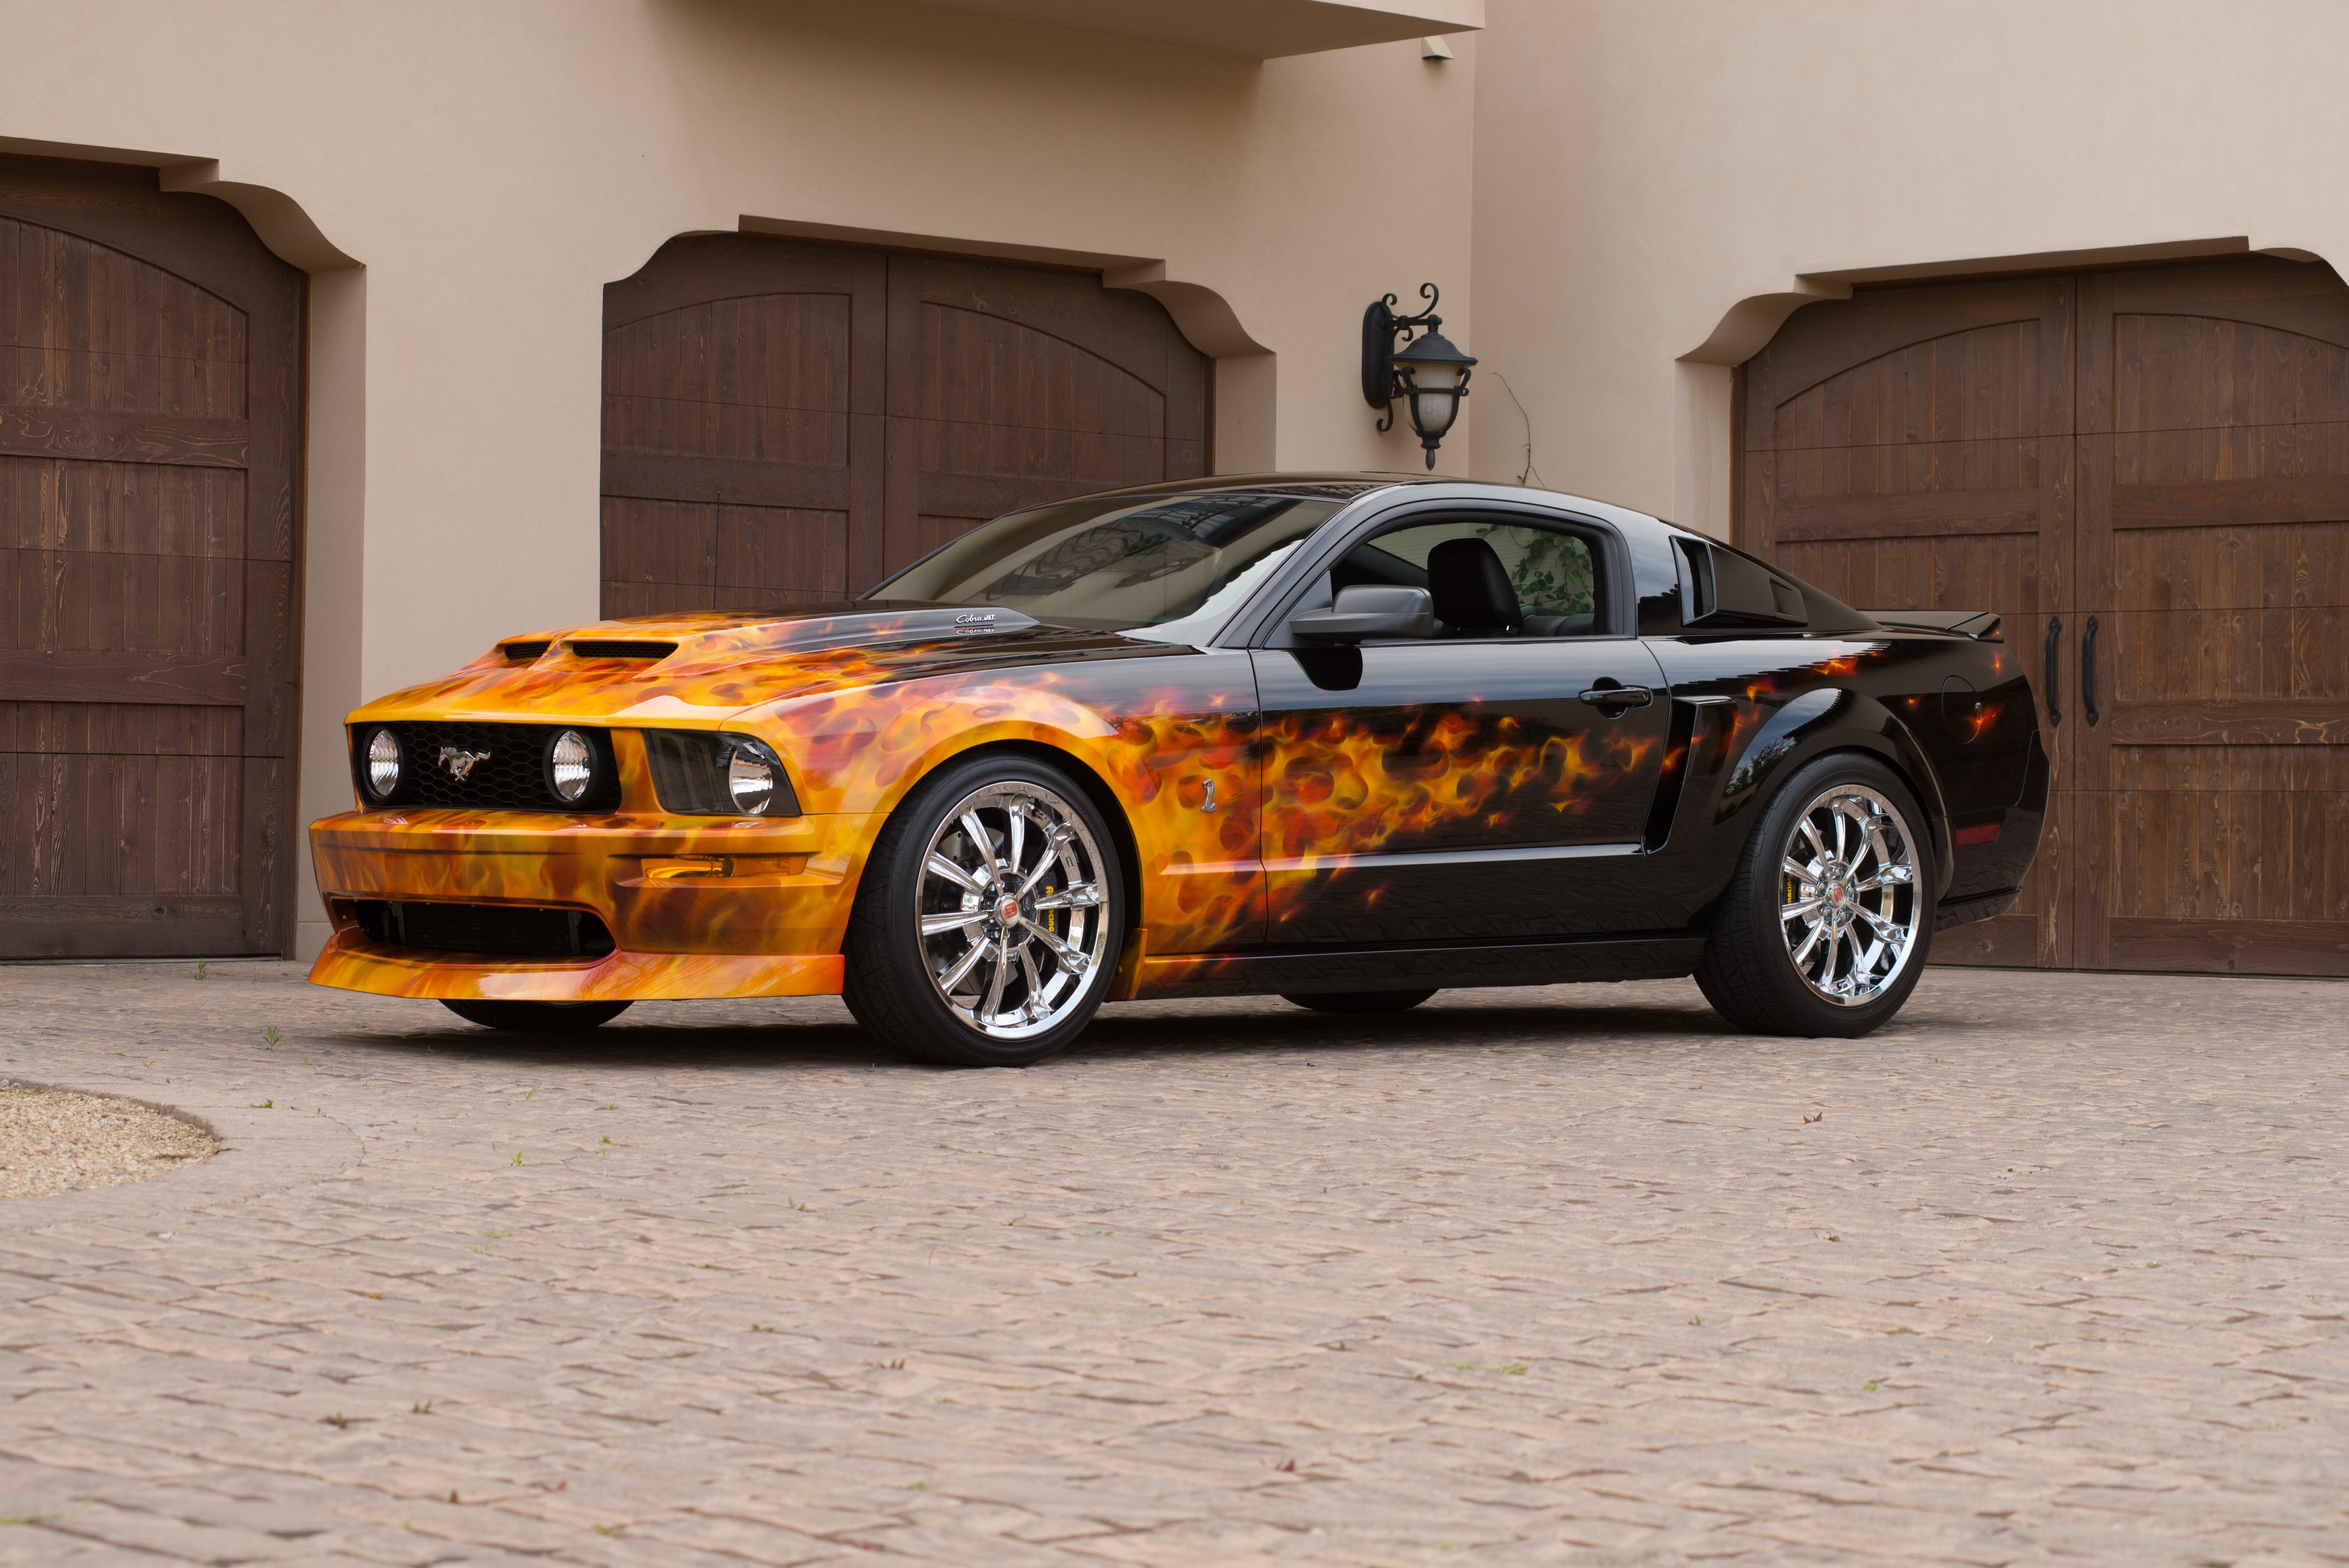 2007, Ford, Mustang, Gt, Pro, Touring, Super, Street, Rodder, Rod, Muscle, Usa, 6016x4016 01 02 Wallpaper